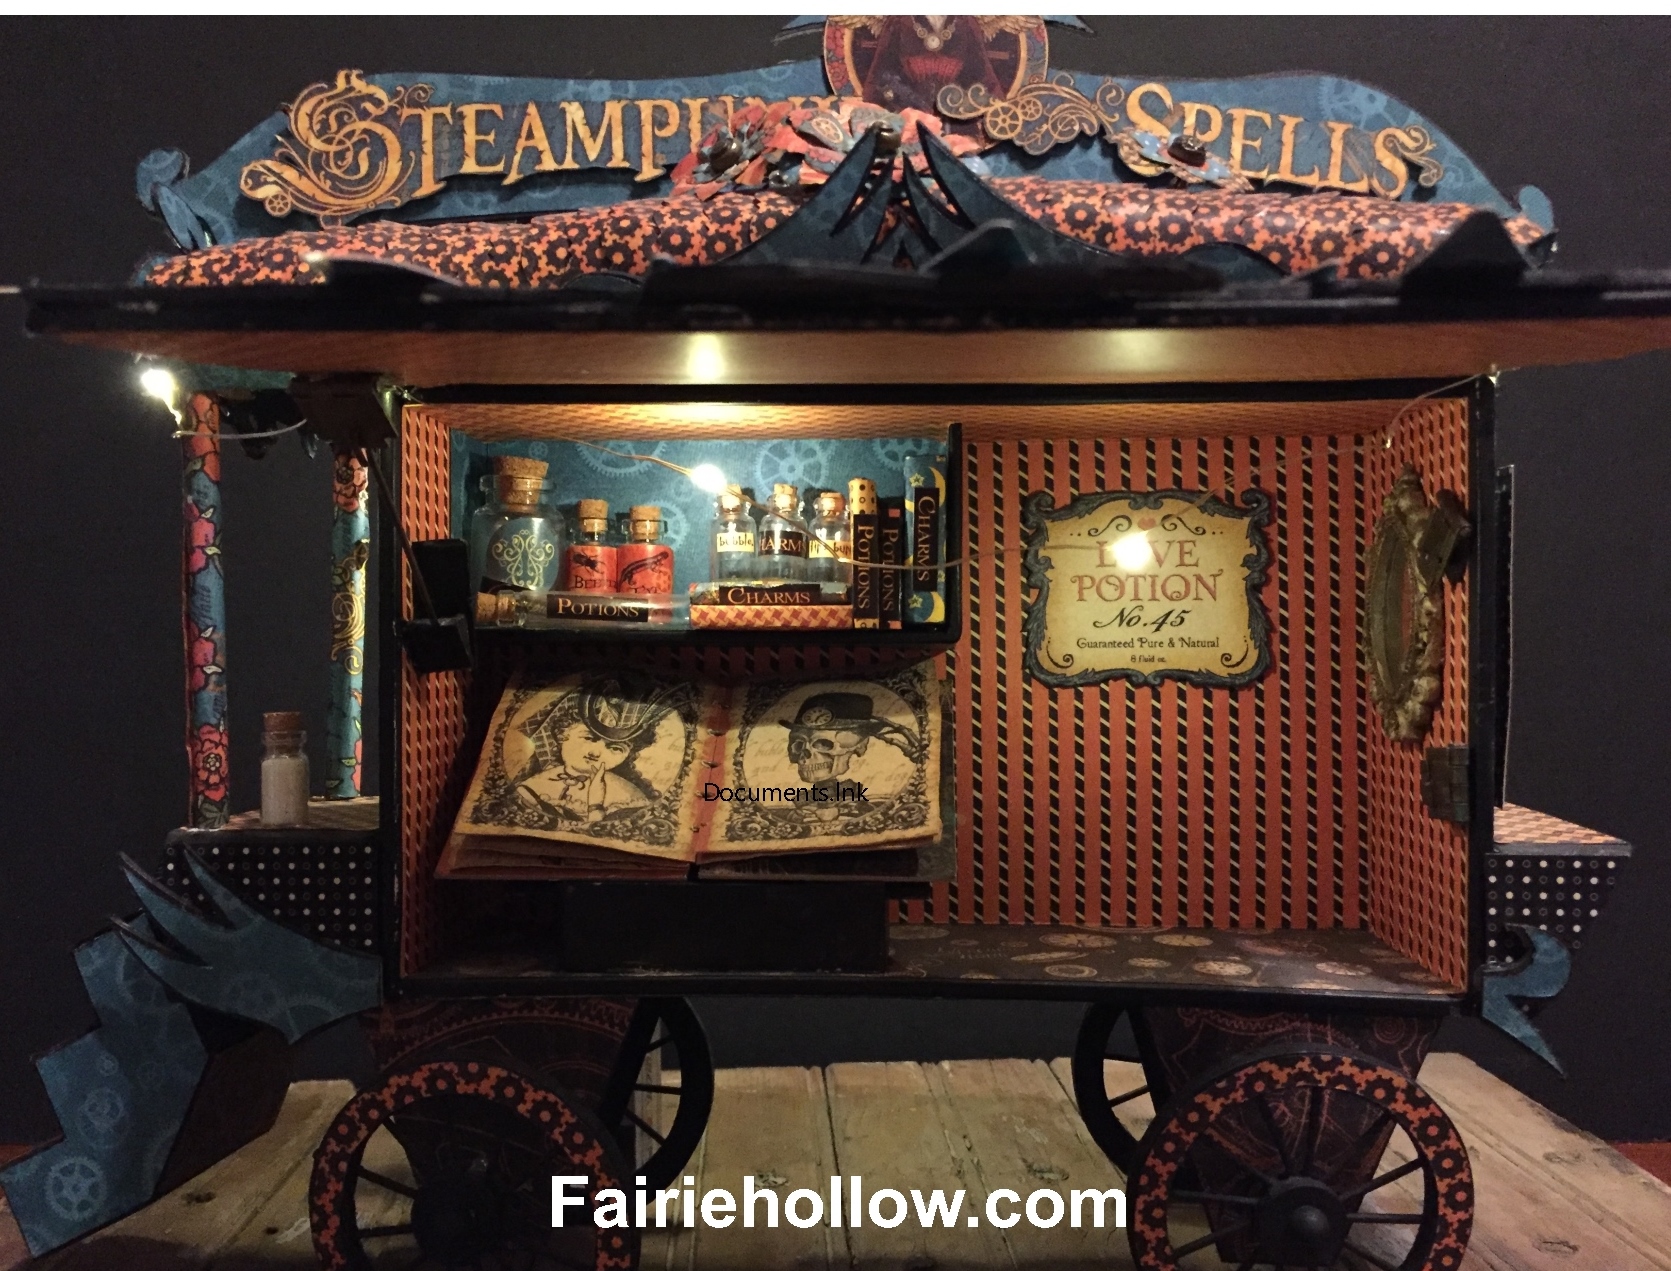 This fairies steampunk caravan is made from a cigar box and covered with papers from Graphic 45. fairiehollow.com